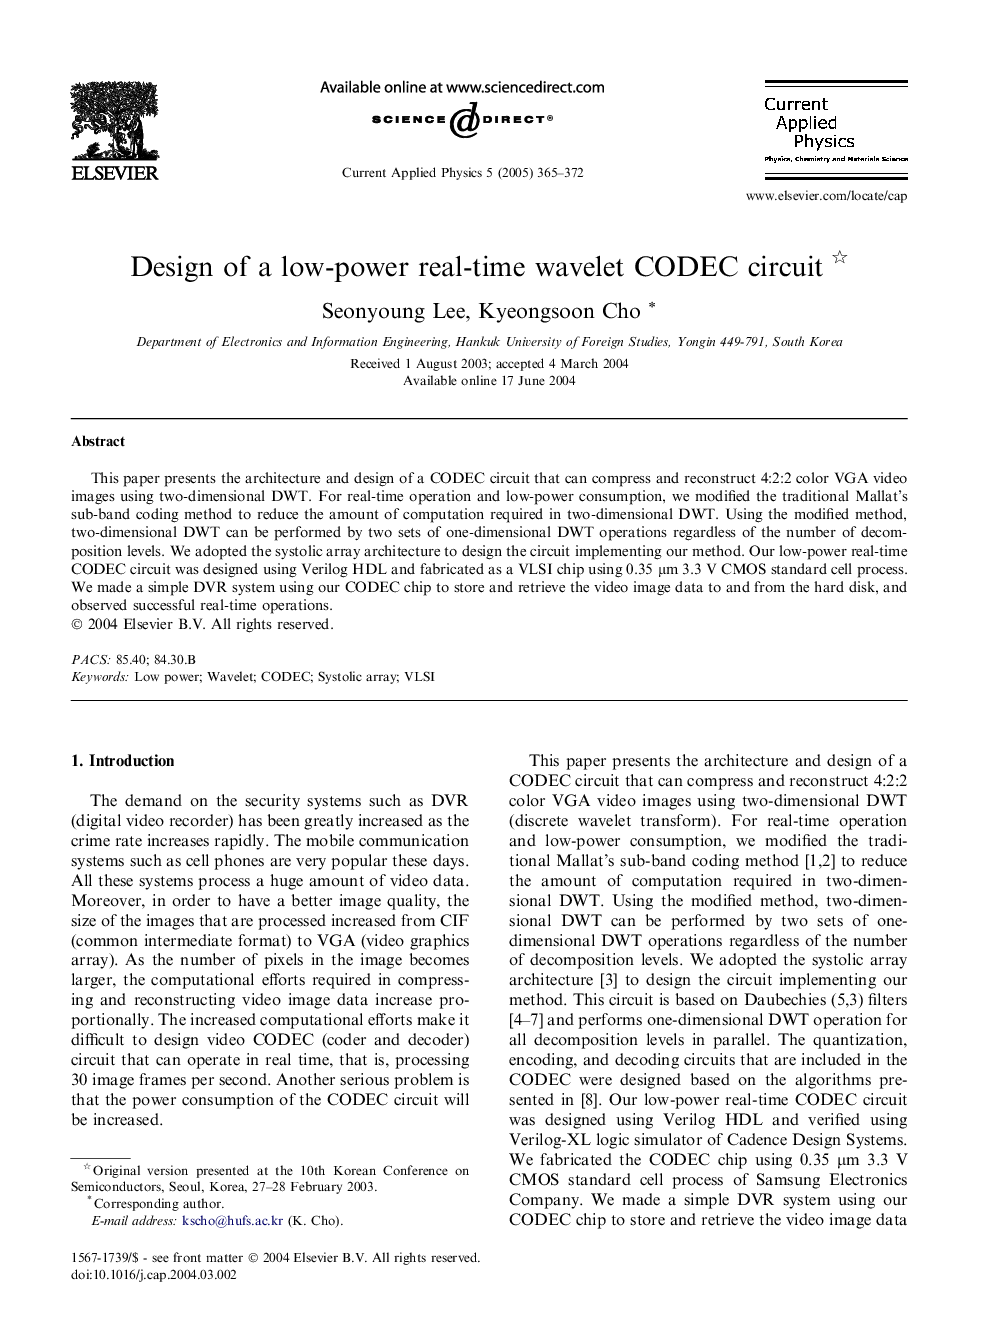 Design of a low-power real-time wavelet CODEC circuit